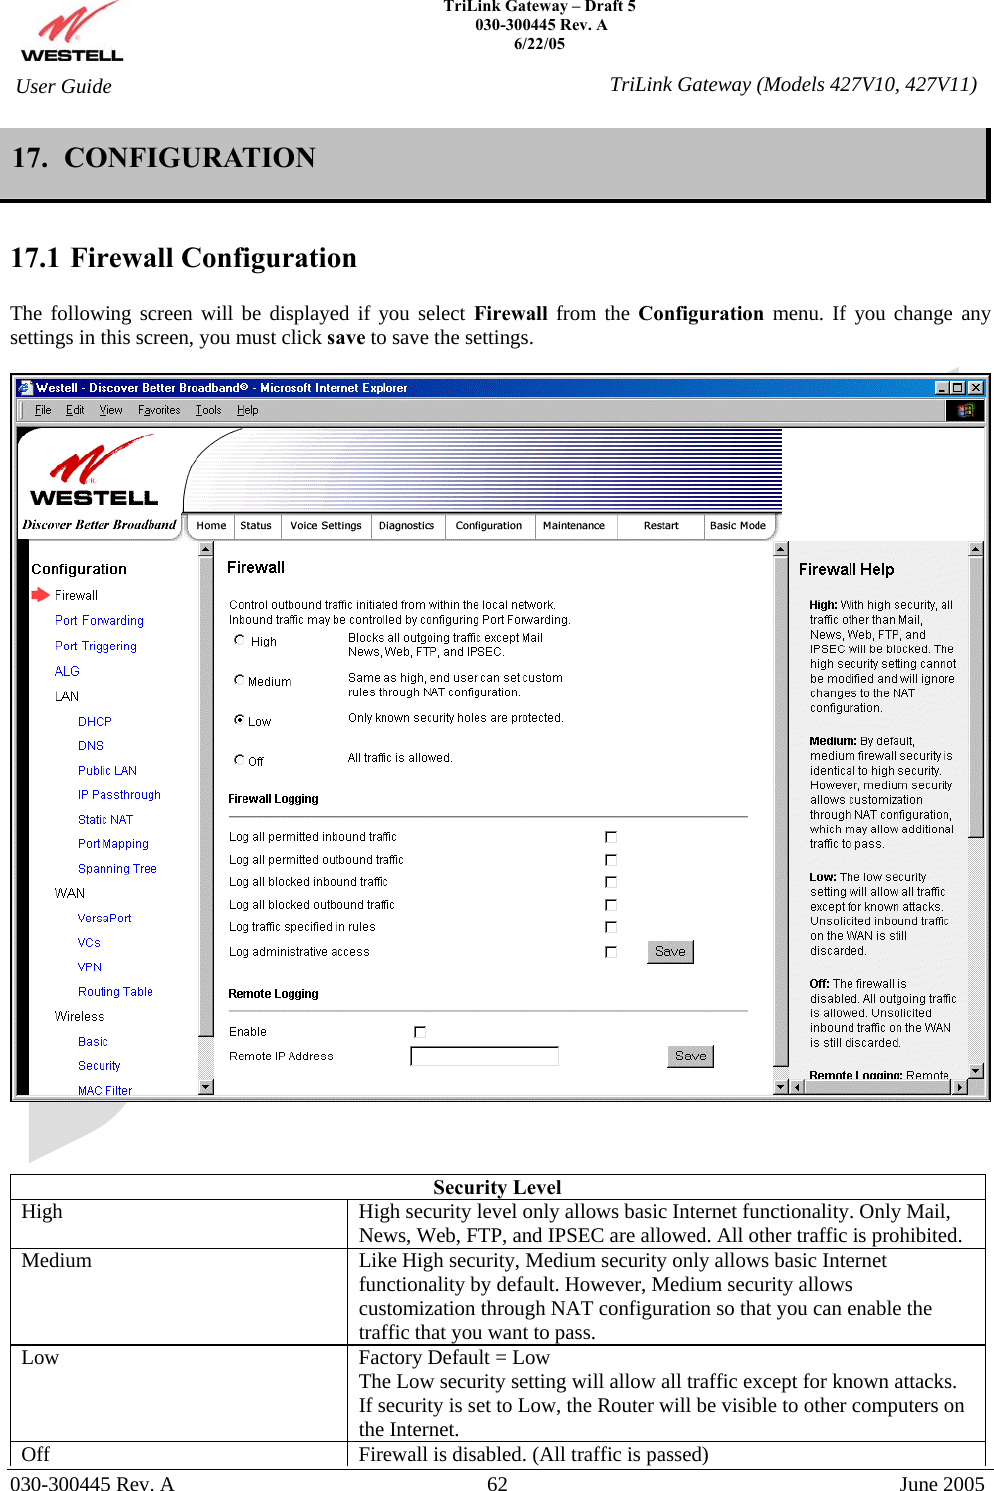    TriLink Gateway – Draft 5   030-300445 Rev. A 6/22/05   030-300445 Rev. A  62  June 2005  User Guide  TriLink Gateway (Models 427V10, 427V11)17.  CONFIGURATION  17.1 Firewall Configuration  The following screen will be displayed if you select Firewall from the Configuration  menu. If you change any settings in this screen, you must click save to save the settings.      Security Level High  High security level only allows basic Internet functionality. Only Mail, News, Web, FTP, and IPSEC are allowed. All other traffic is prohibited. Medium  Like High security, Medium security only allows basic Internet functionality by default. However, Medium security allows customization through NAT configuration so that you can enable the traffic that you want to pass. Low  Factory Default = Low The Low security setting will allow all traffic except for known attacks. If security is set to Low, the Router will be visible to other computers on the Internet. Off  Firewall is disabled. (All traffic is passed)  